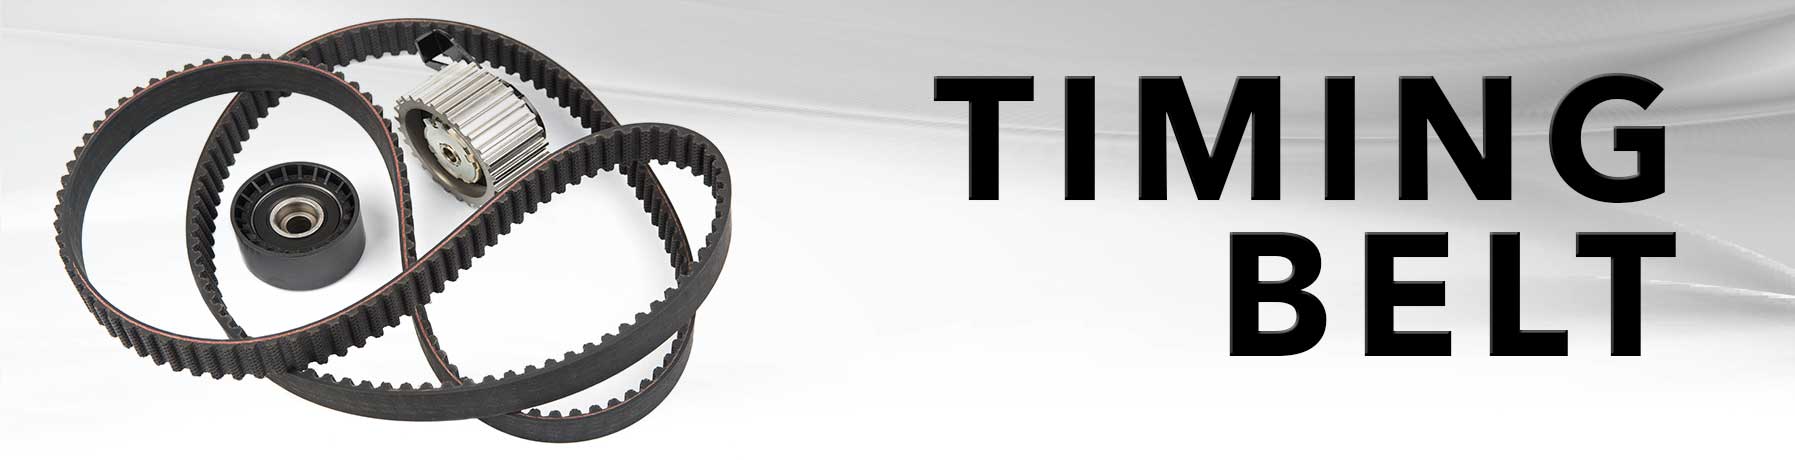 Timing belt repair banner image with picture of a belt and cogs